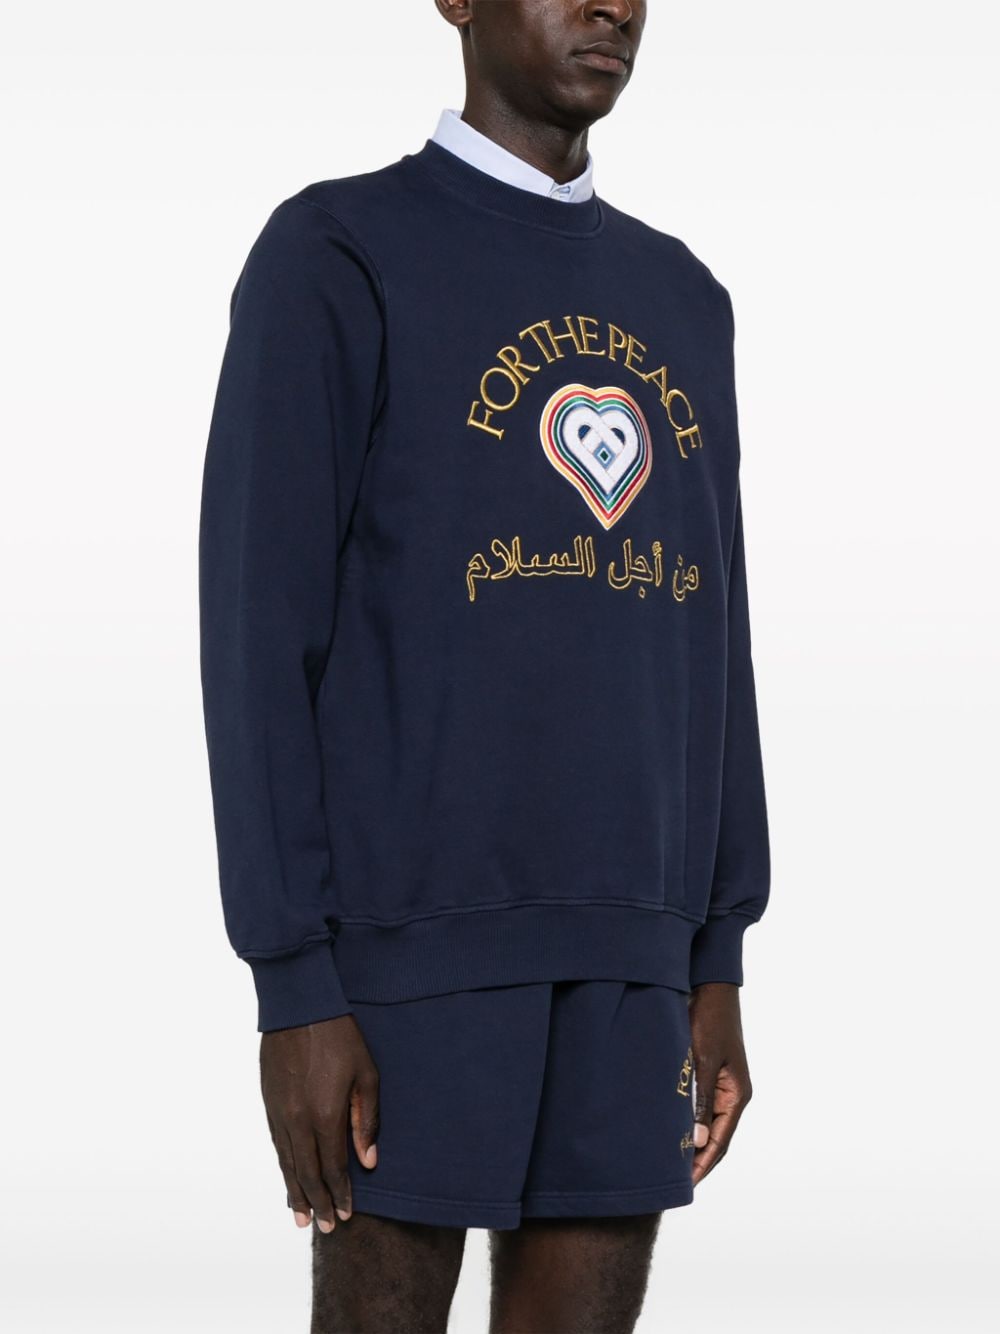 For The Peace cotton sweatshirt